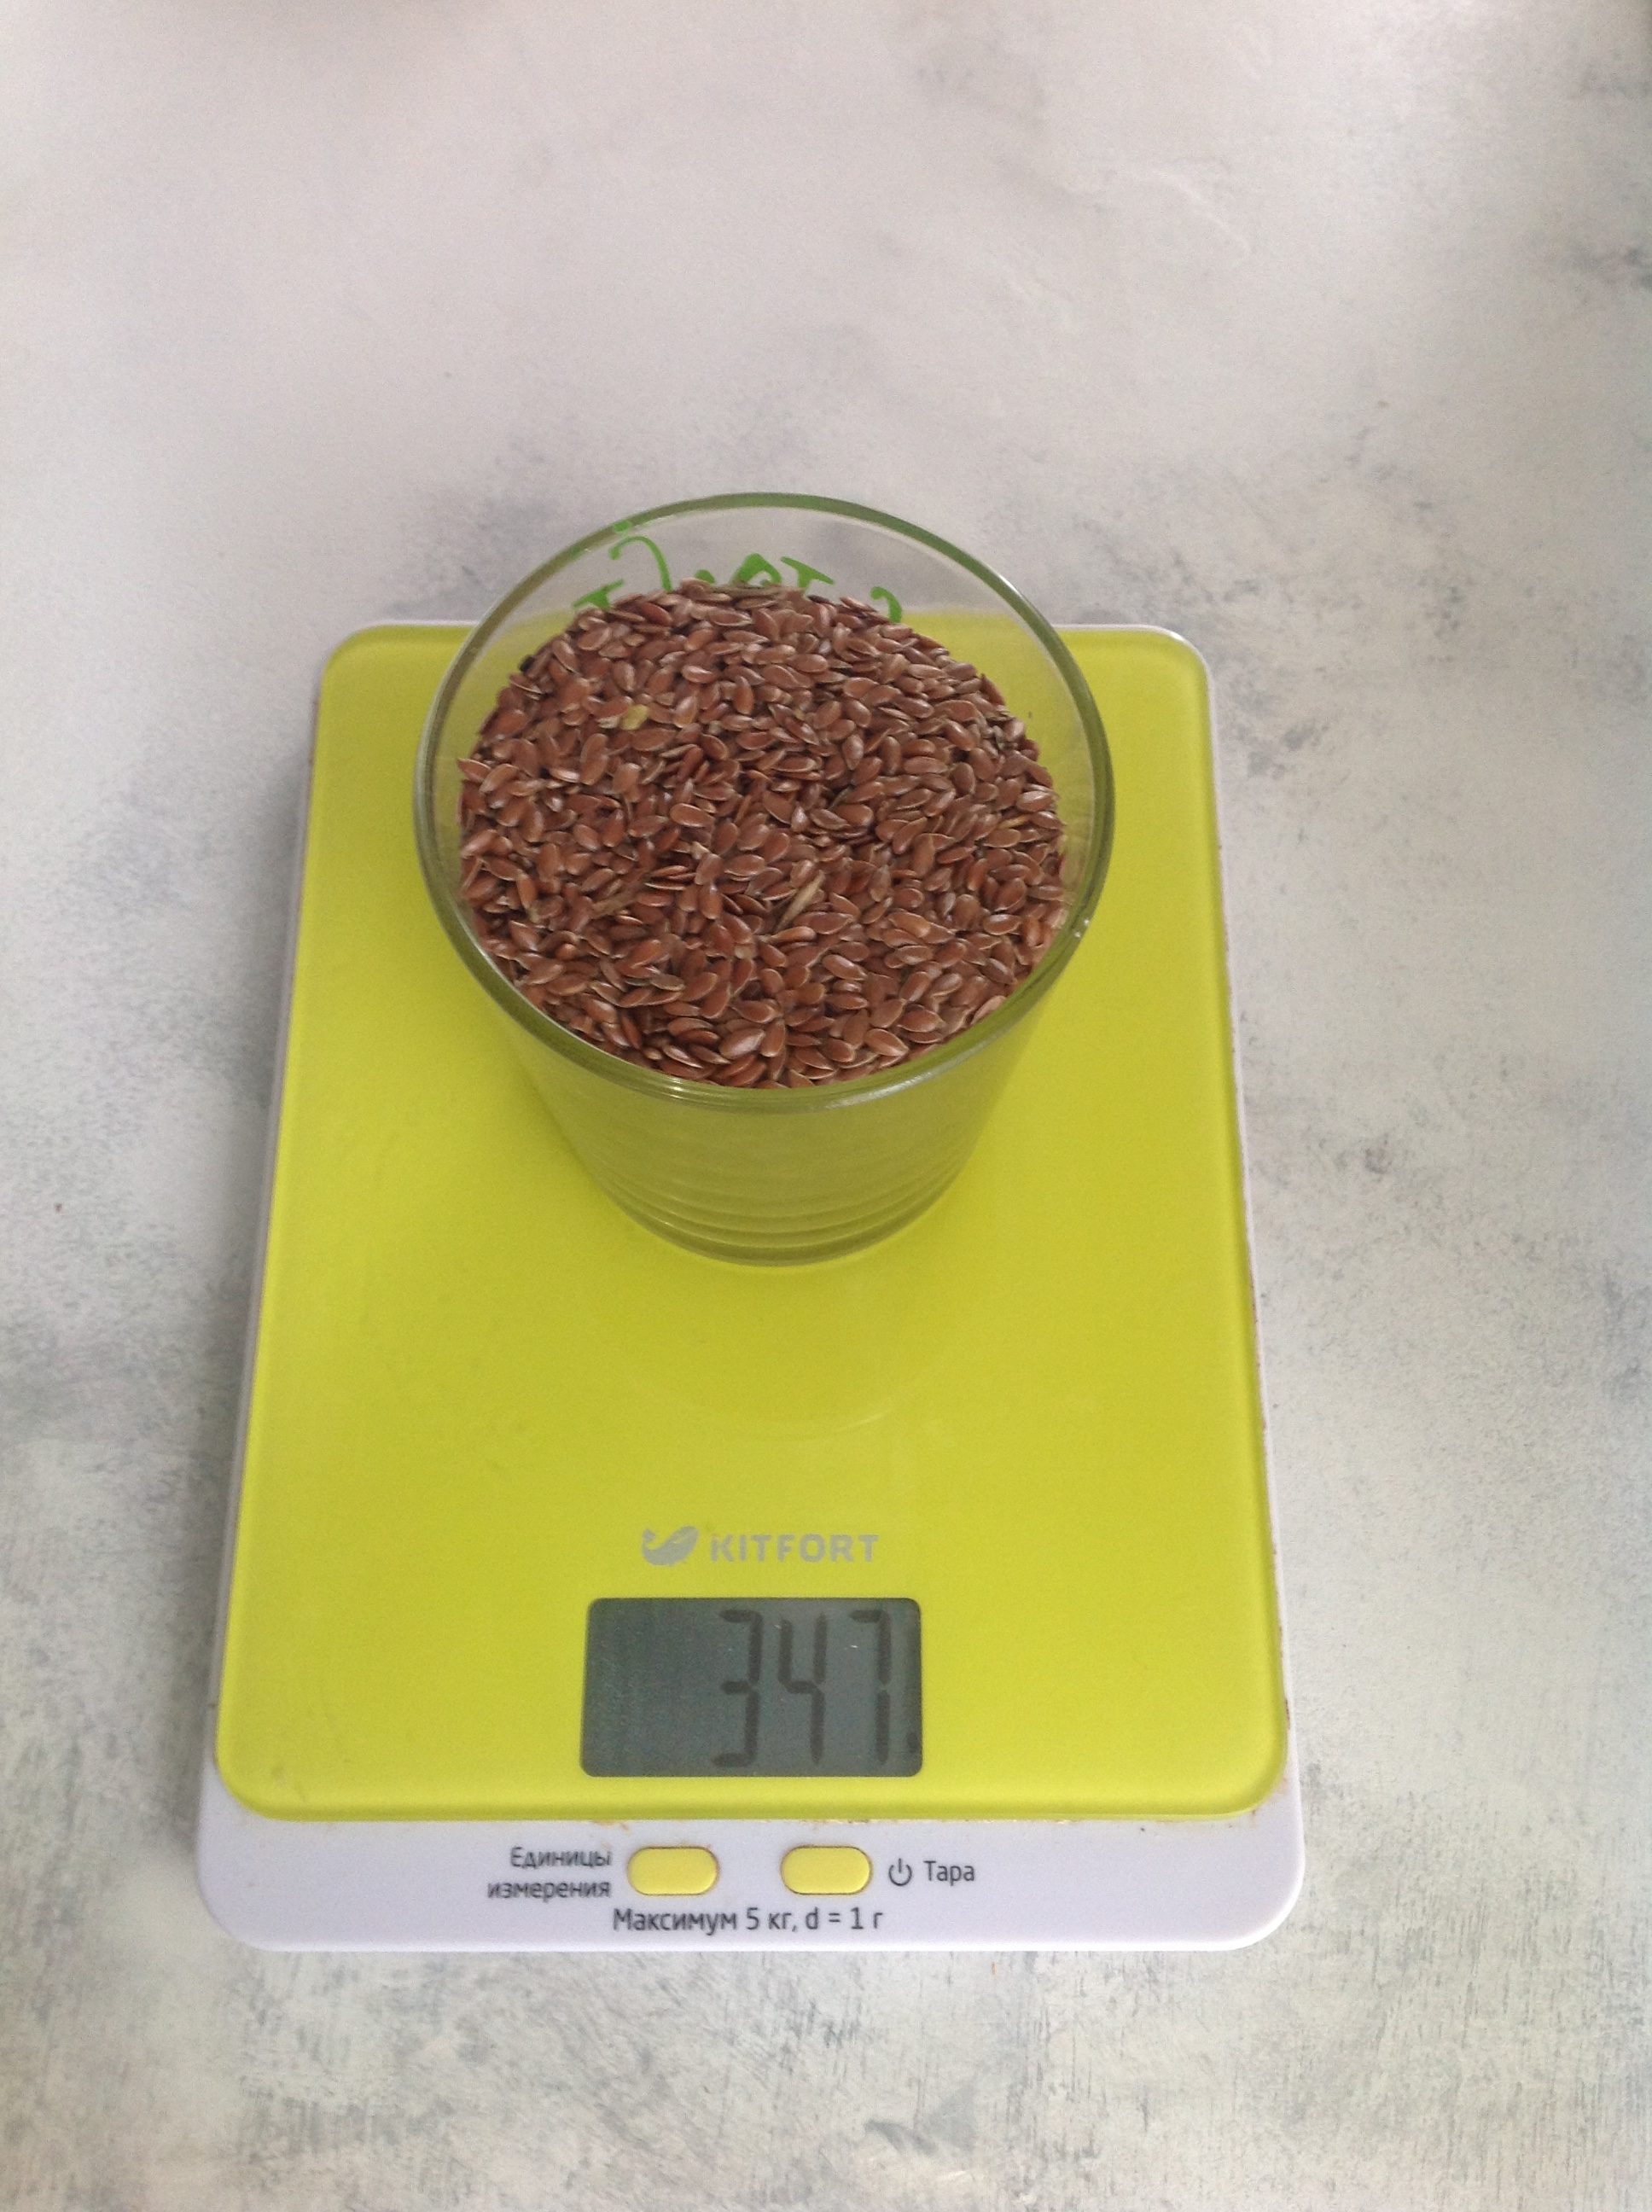 How much does a flax seed weigh in a 250 ml glass?